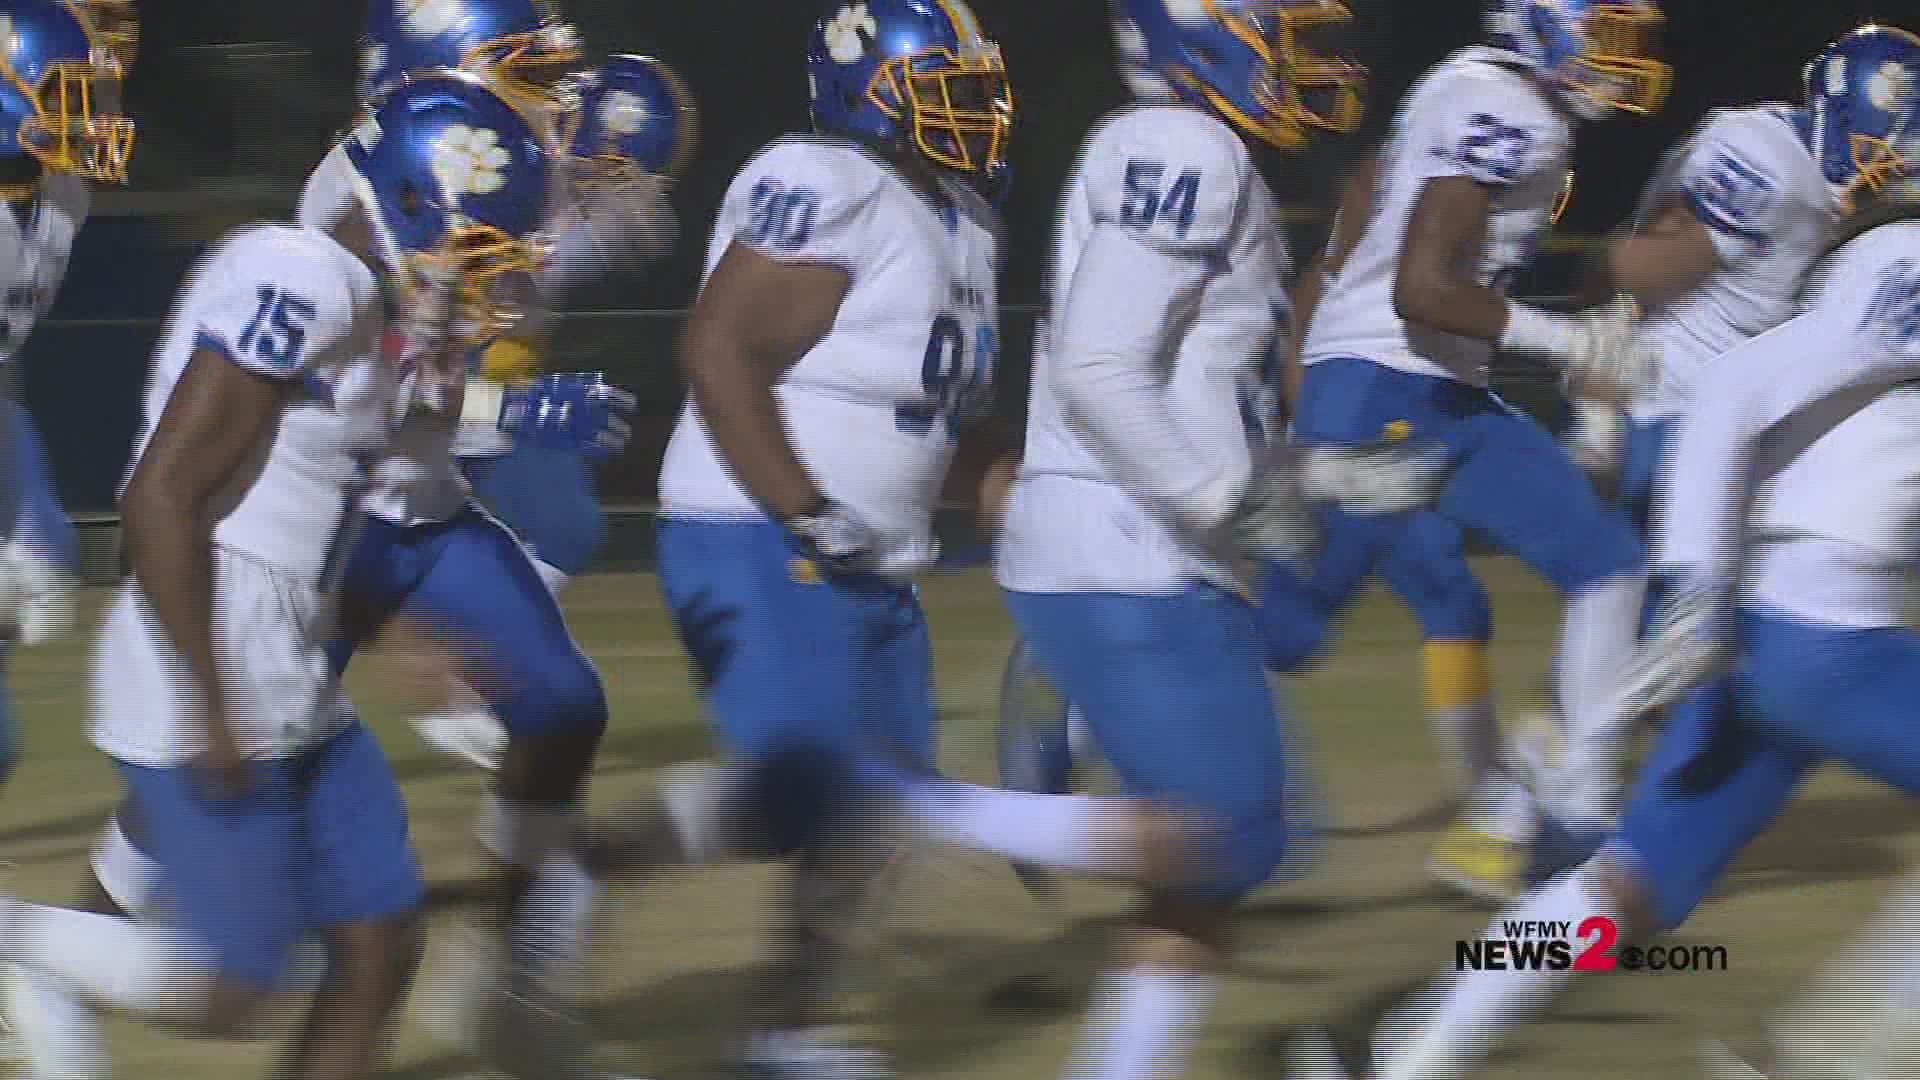 Week 1 highlights of the High School football season between Dudley and Page